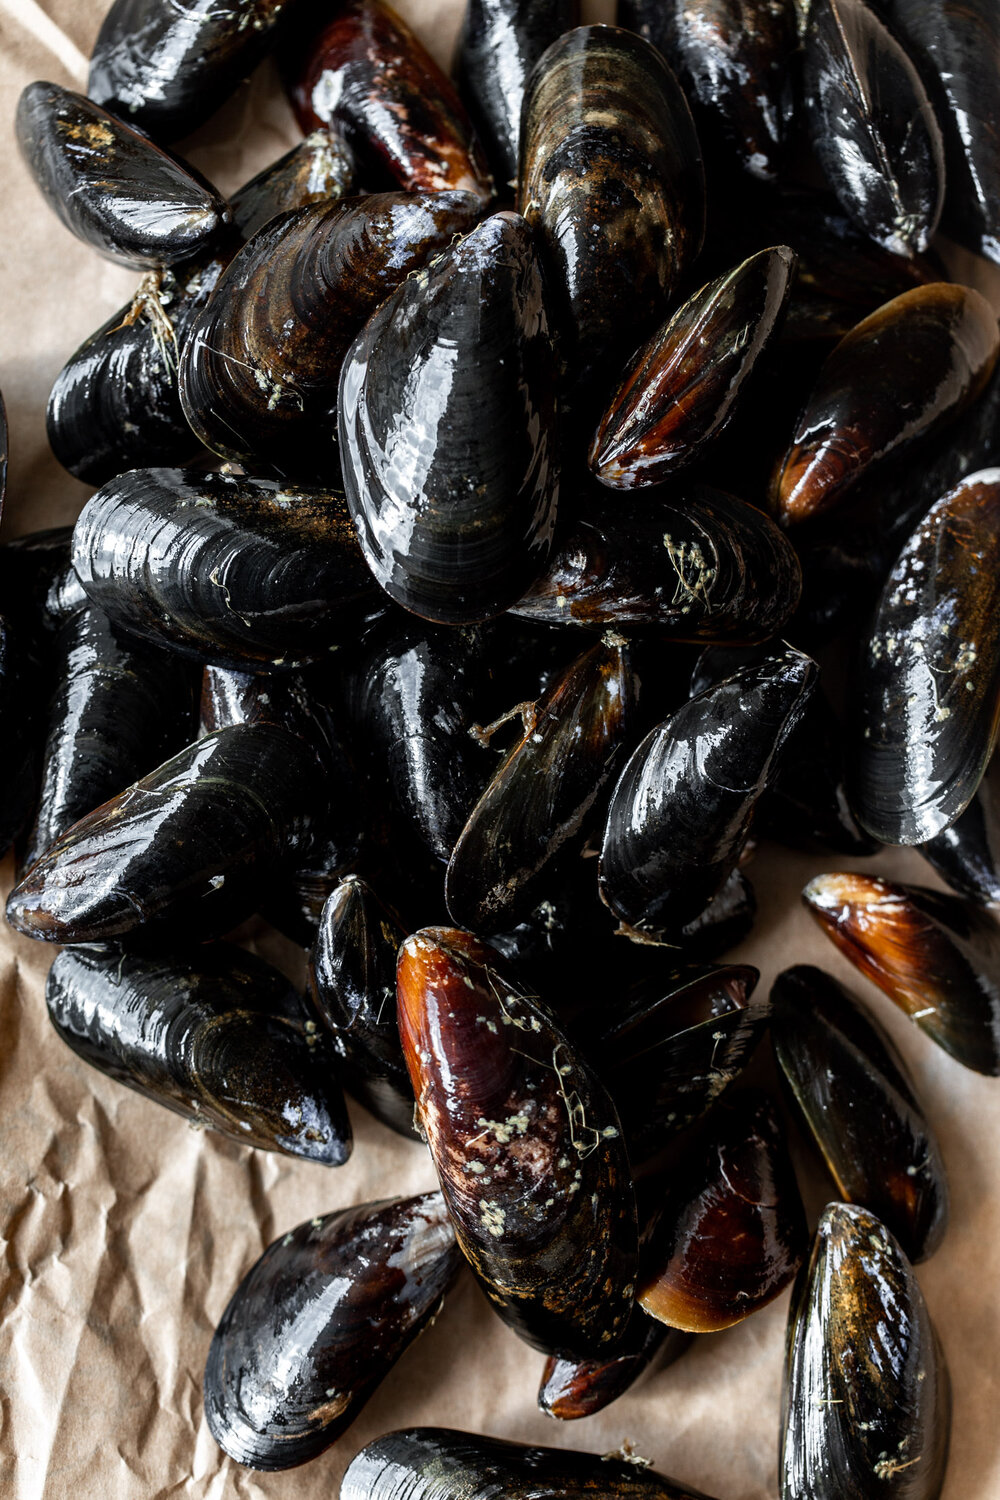 scrubbed and debearded mussels